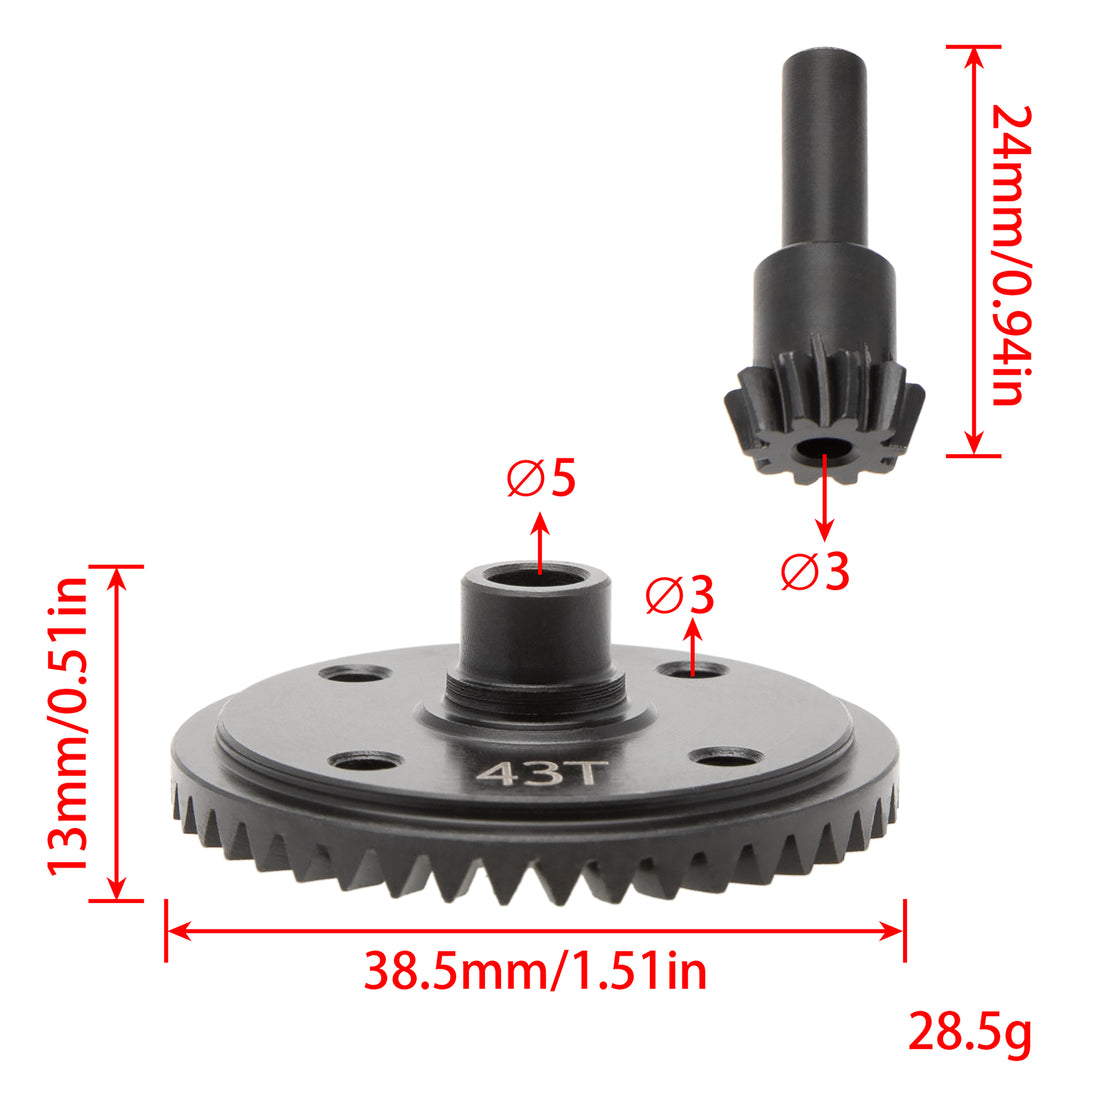 Carbon Steel Diff Gear 10T 43T Gearbox Differential Gears Set